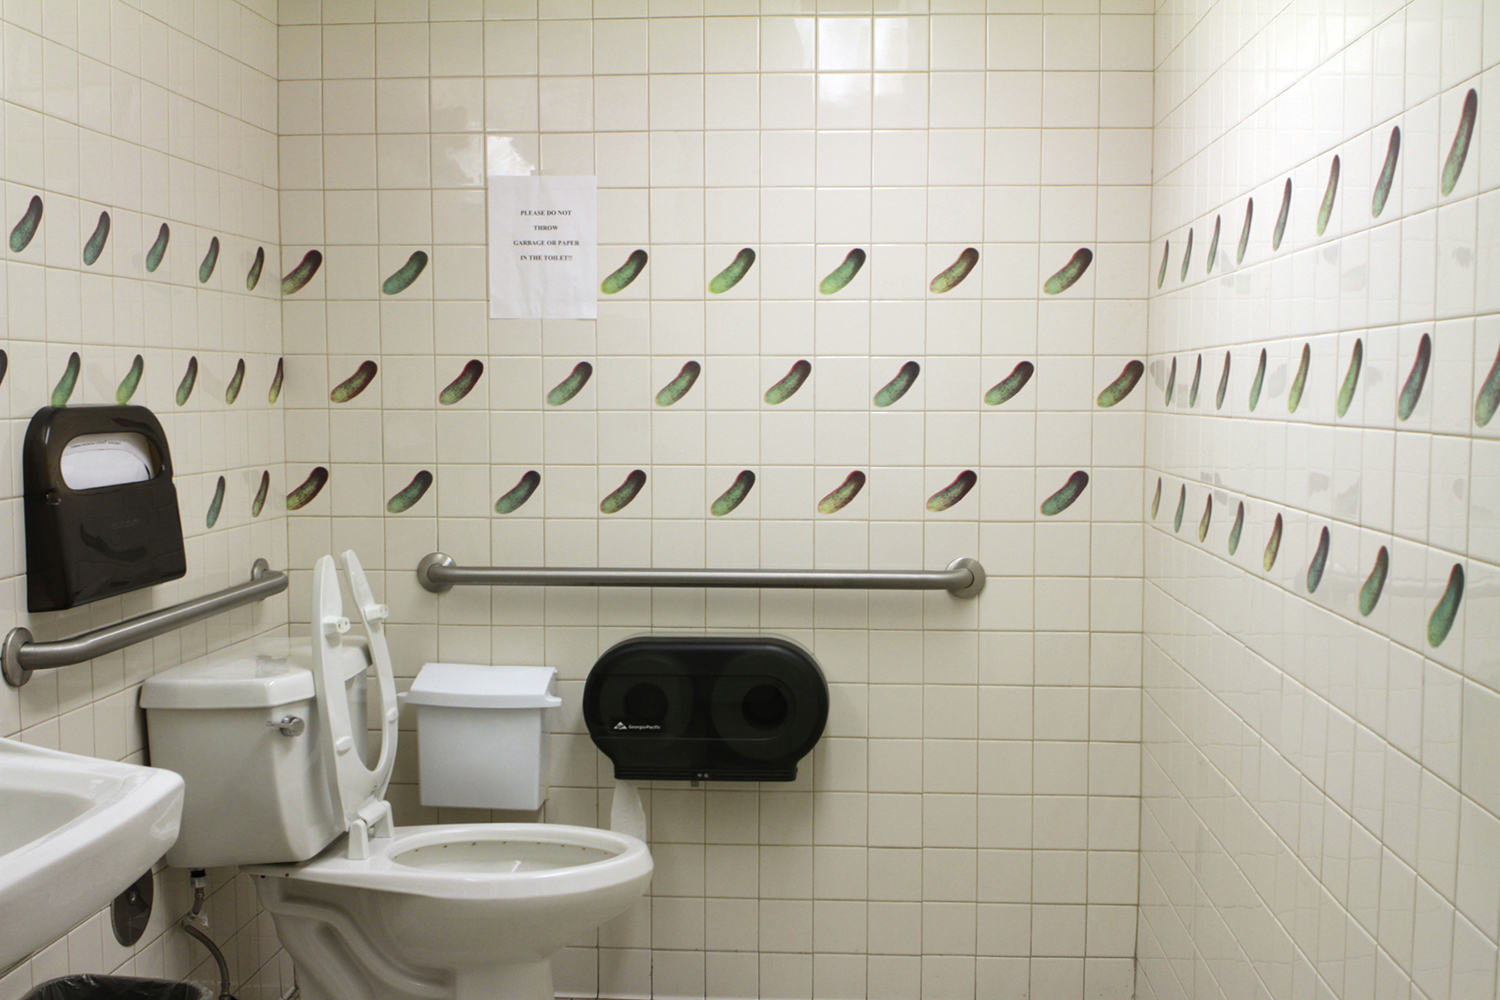 3-D Pickle Stickers in Bathroom, 2012, installation 